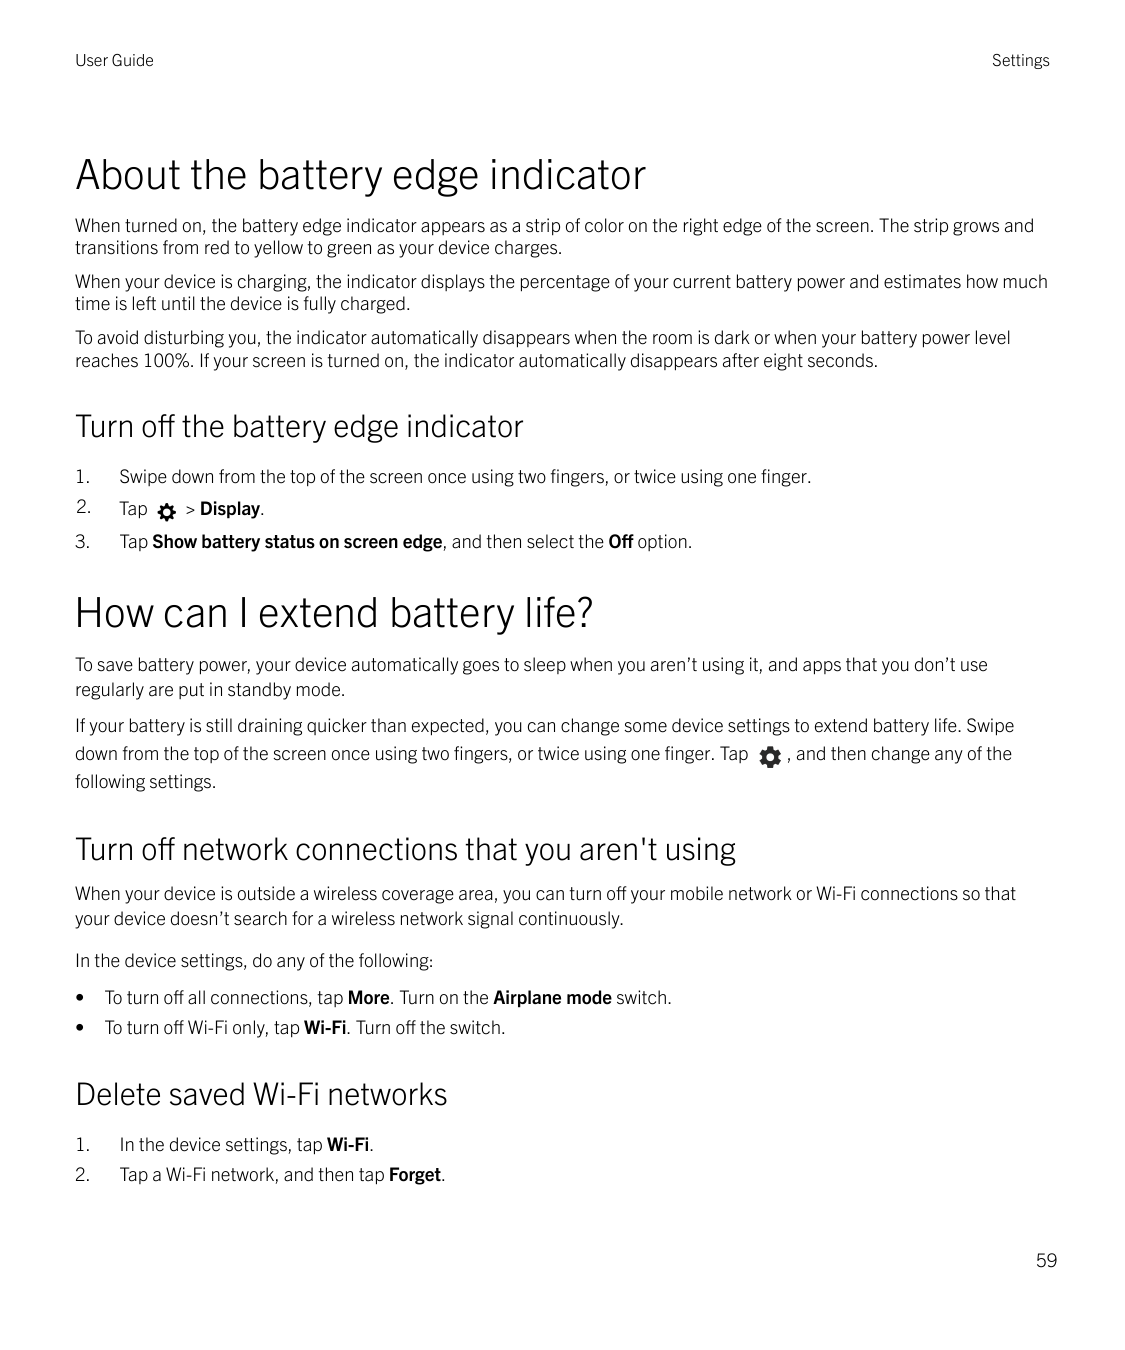 User GuideSettingsAbout the battery edge indicatorWhen turned on, the battery edge indicator appears as a strip of color on the 